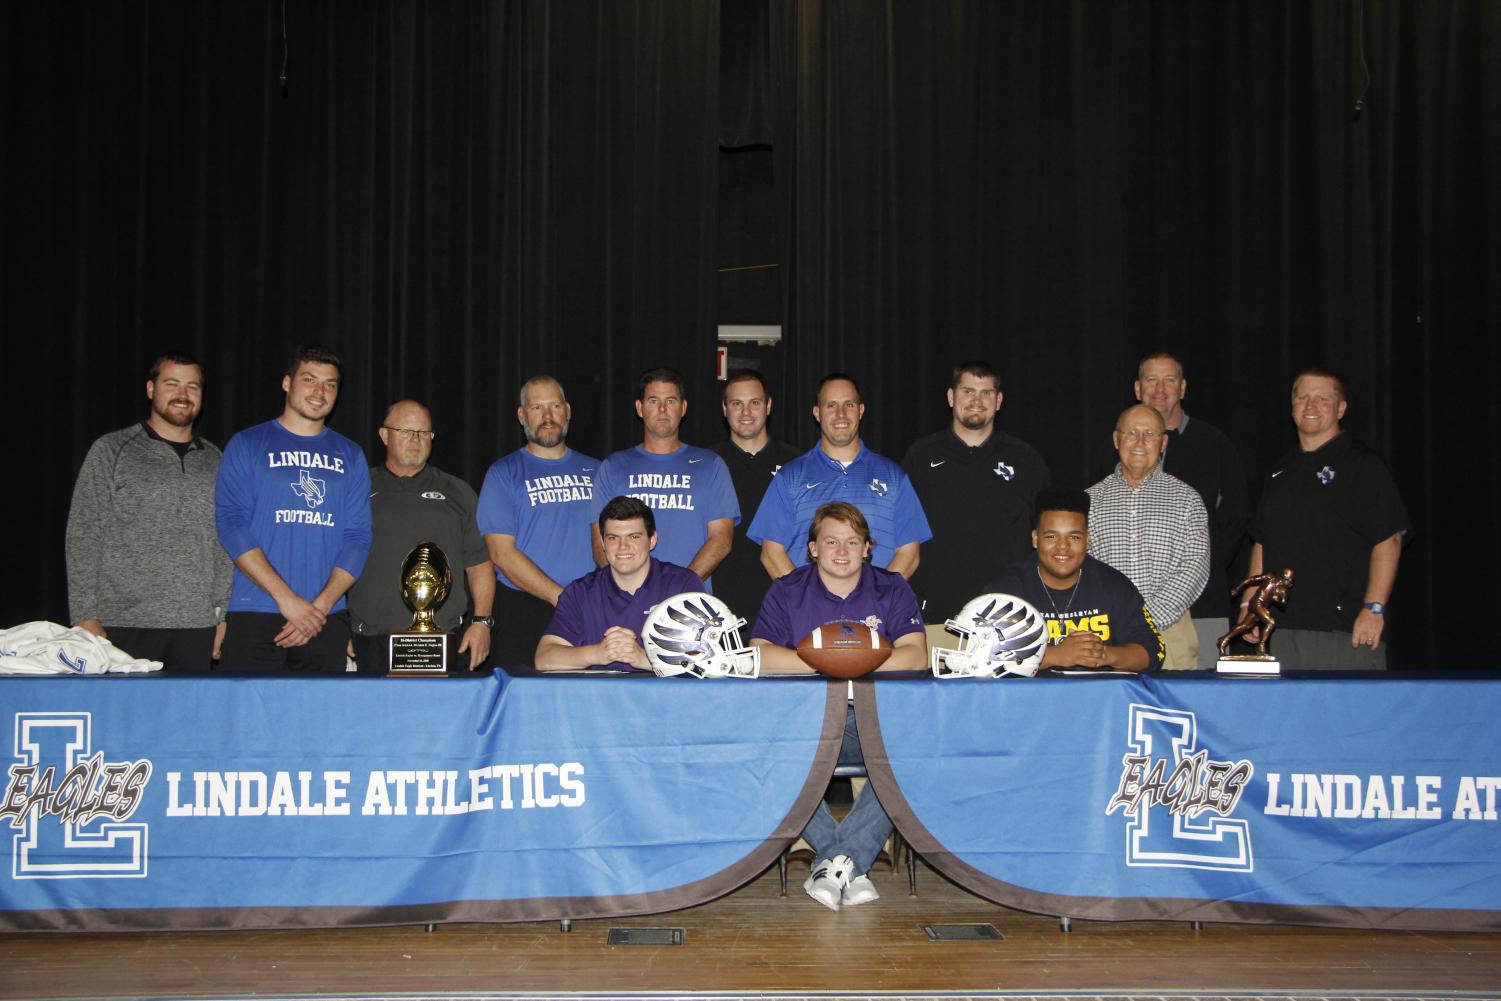 Senior football athletes James Sandifer, Dillon Heinaman and Cason Cheney pose with their coaches at the signing ceremony. Heinaman and Sandifer will be attending Hardin-Simmons University in Abilene, while Cheney will be going to Texas Wesleyan University in Fort Worth.